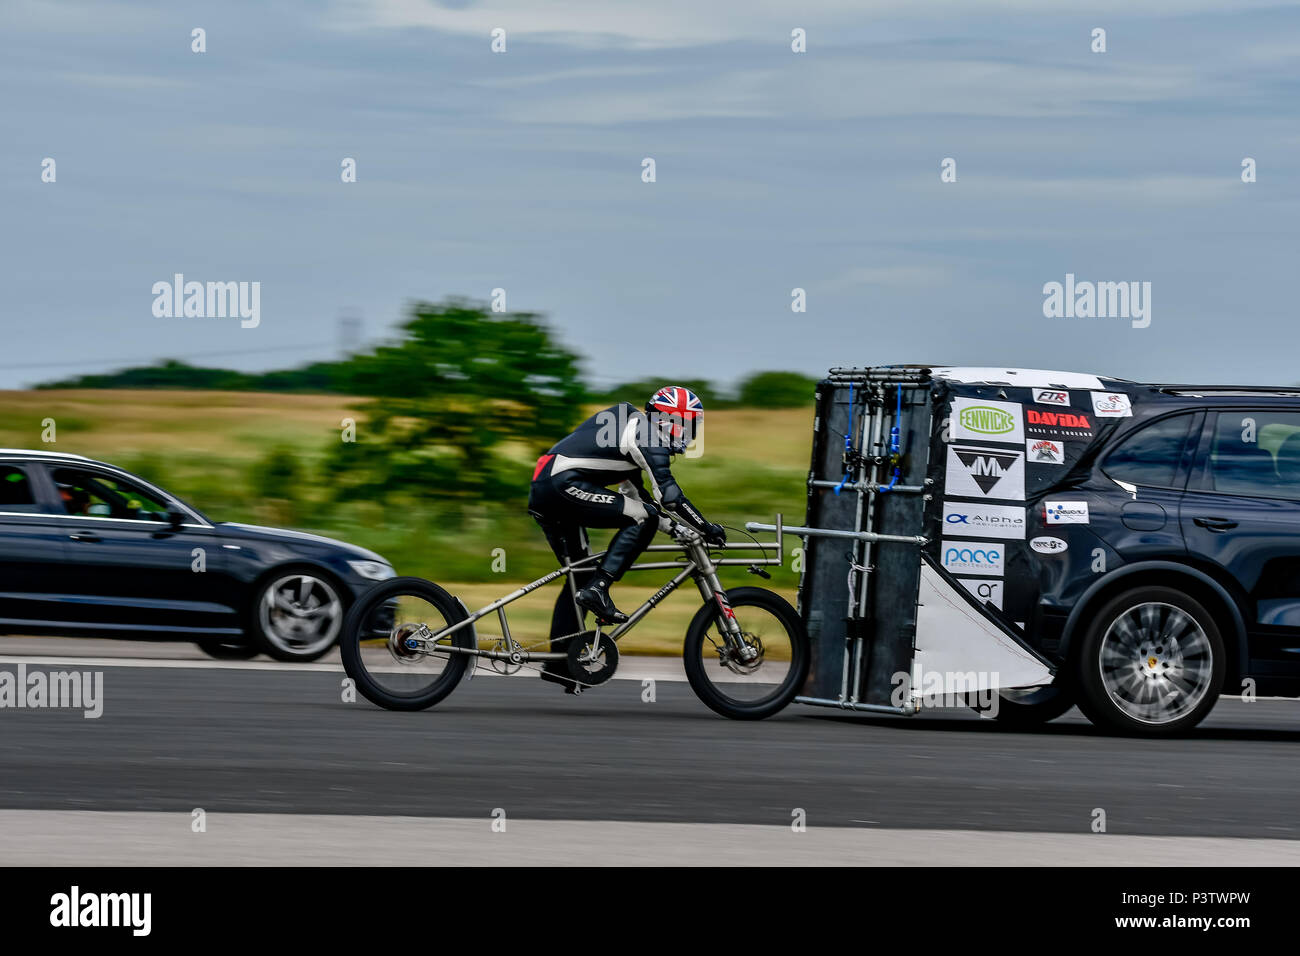 Elvington Airfield, Yorkshire, UK. 19th Jun, 2018. Neil Campbell sets European top speed record on self propelled bicycle riding at 135.3mph at Elvington Straightliners top speed event 19th June 2018 Credit: Mark Burn/Alamy Live News Stock Photo